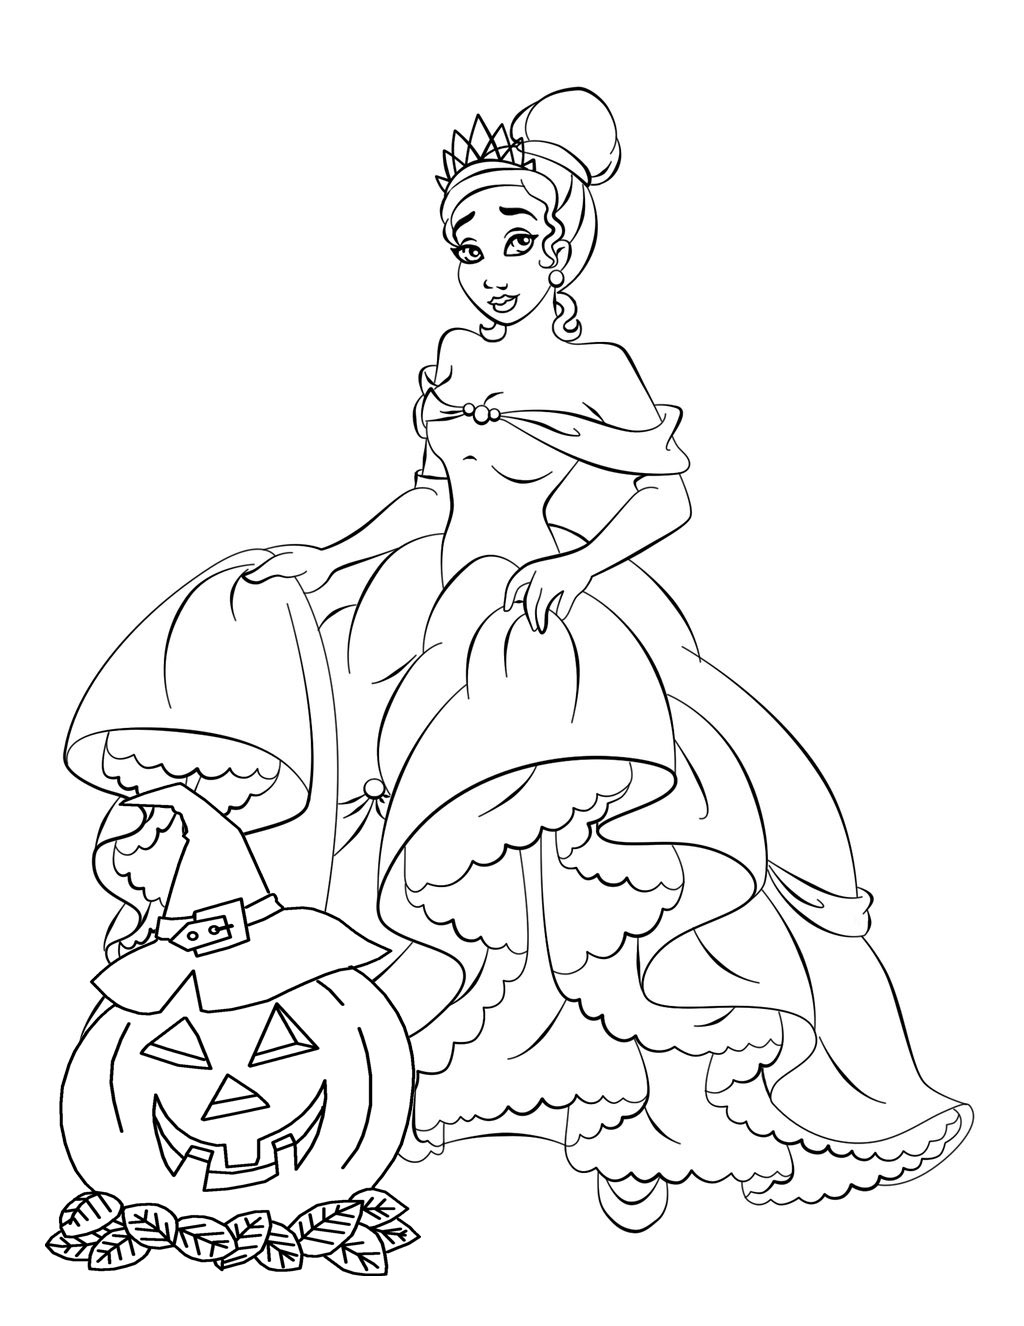 Free Disney Halloween Coloring Pages Lovebugs and Postcards